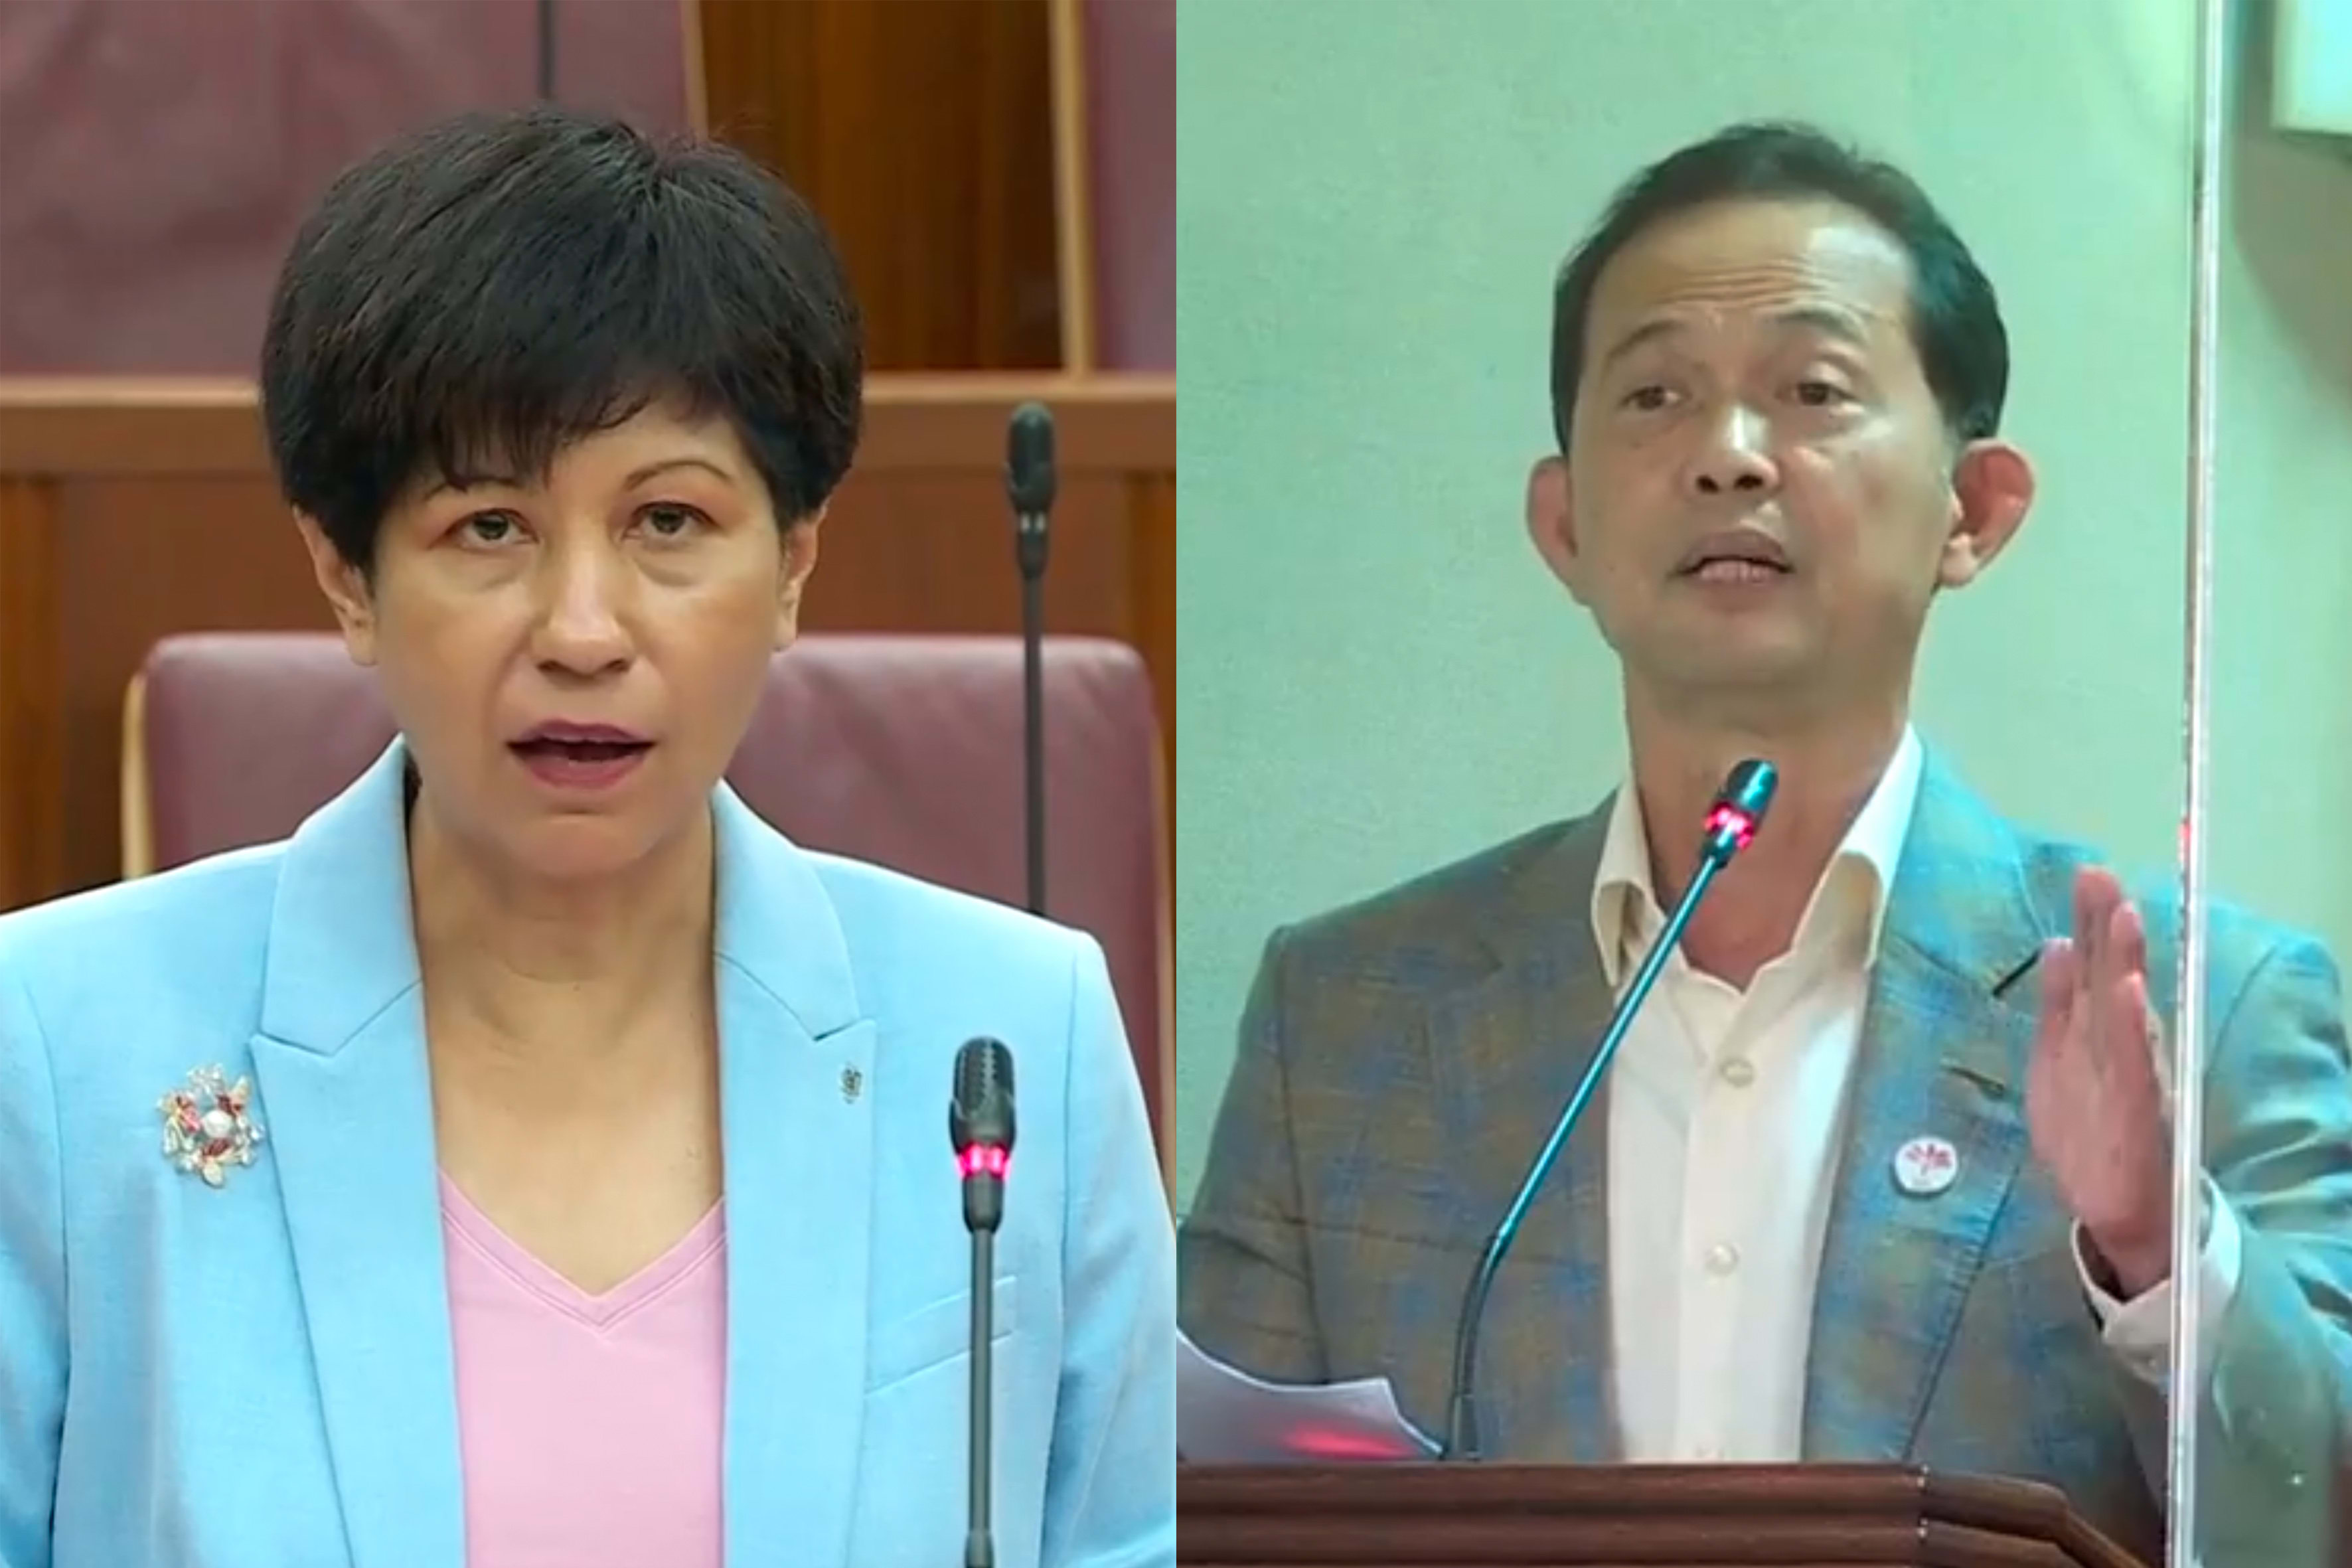 Indranee Rajah rebukes PSP's Leong Mun Wai over claims of students being differentiated based on vaccination status